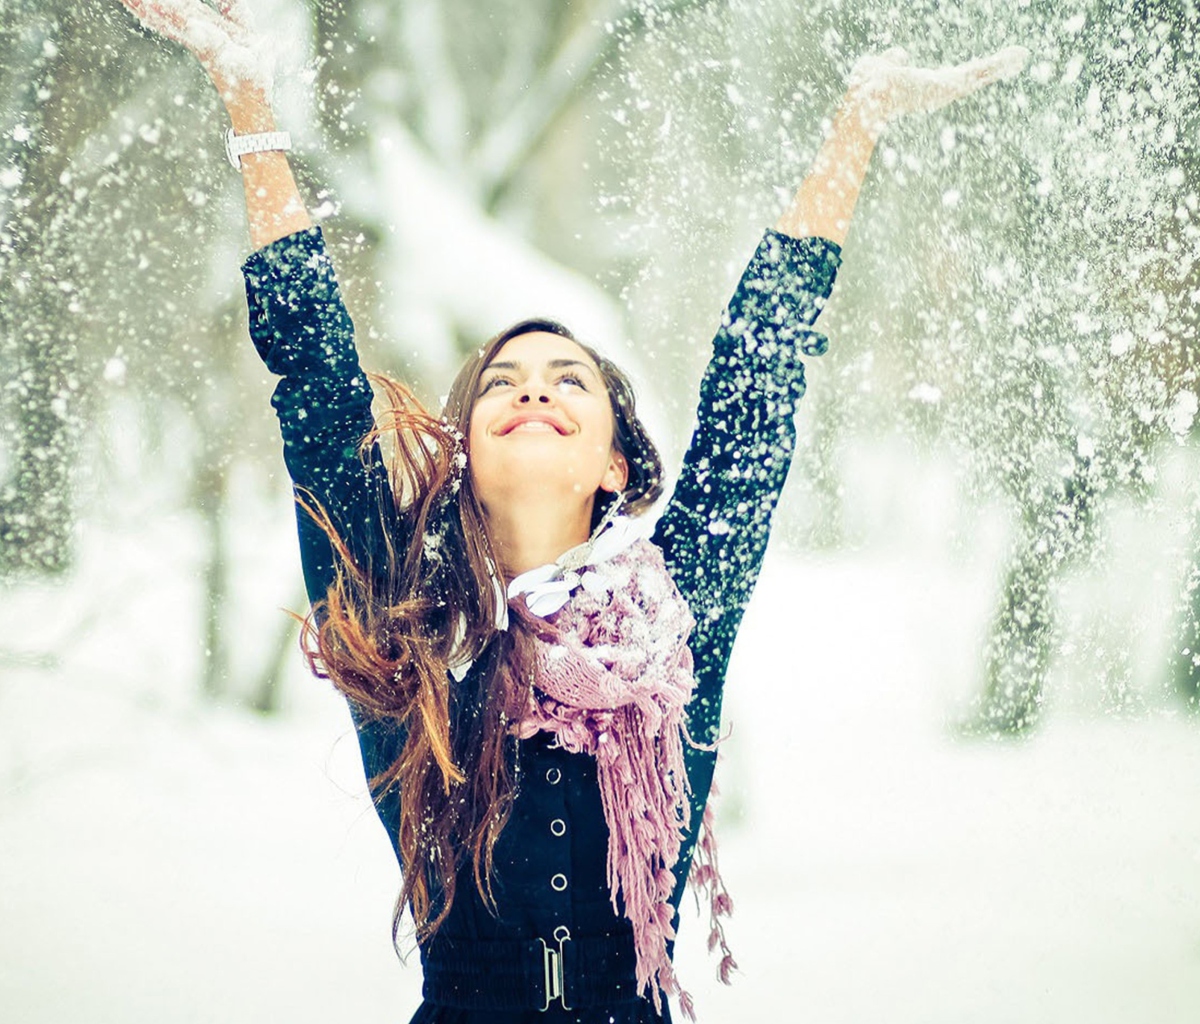 Winter, Snow And Happy Girl wallpaper 1200x1024